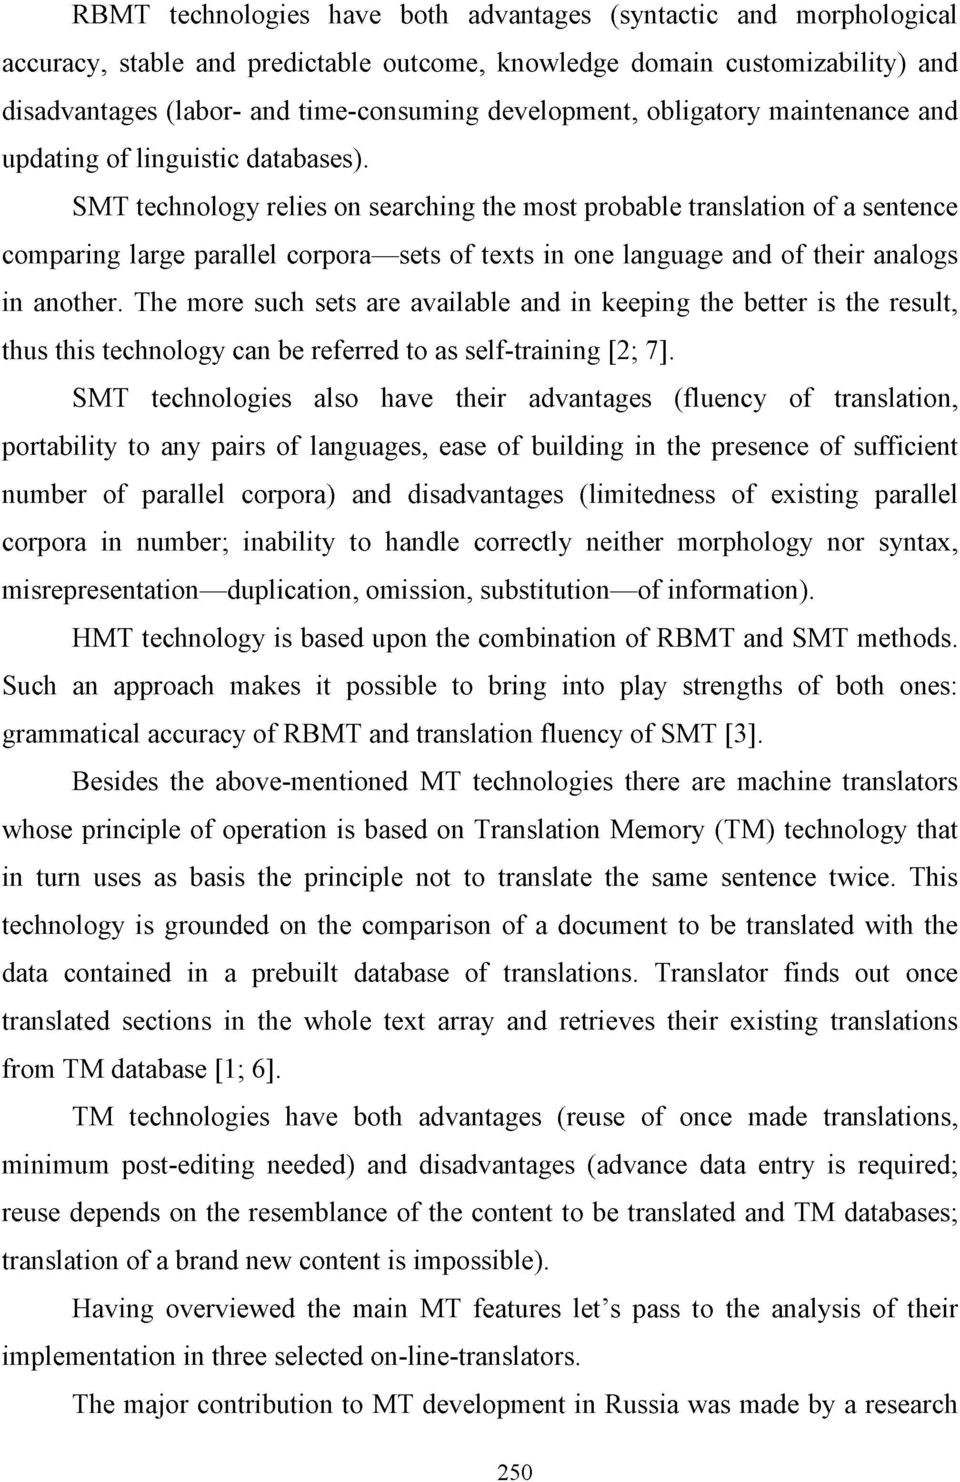 SMT technology relies on searching the most probable translation of a sentence comparing large parallel corpora sets of texts in one language and of their analogs in another.